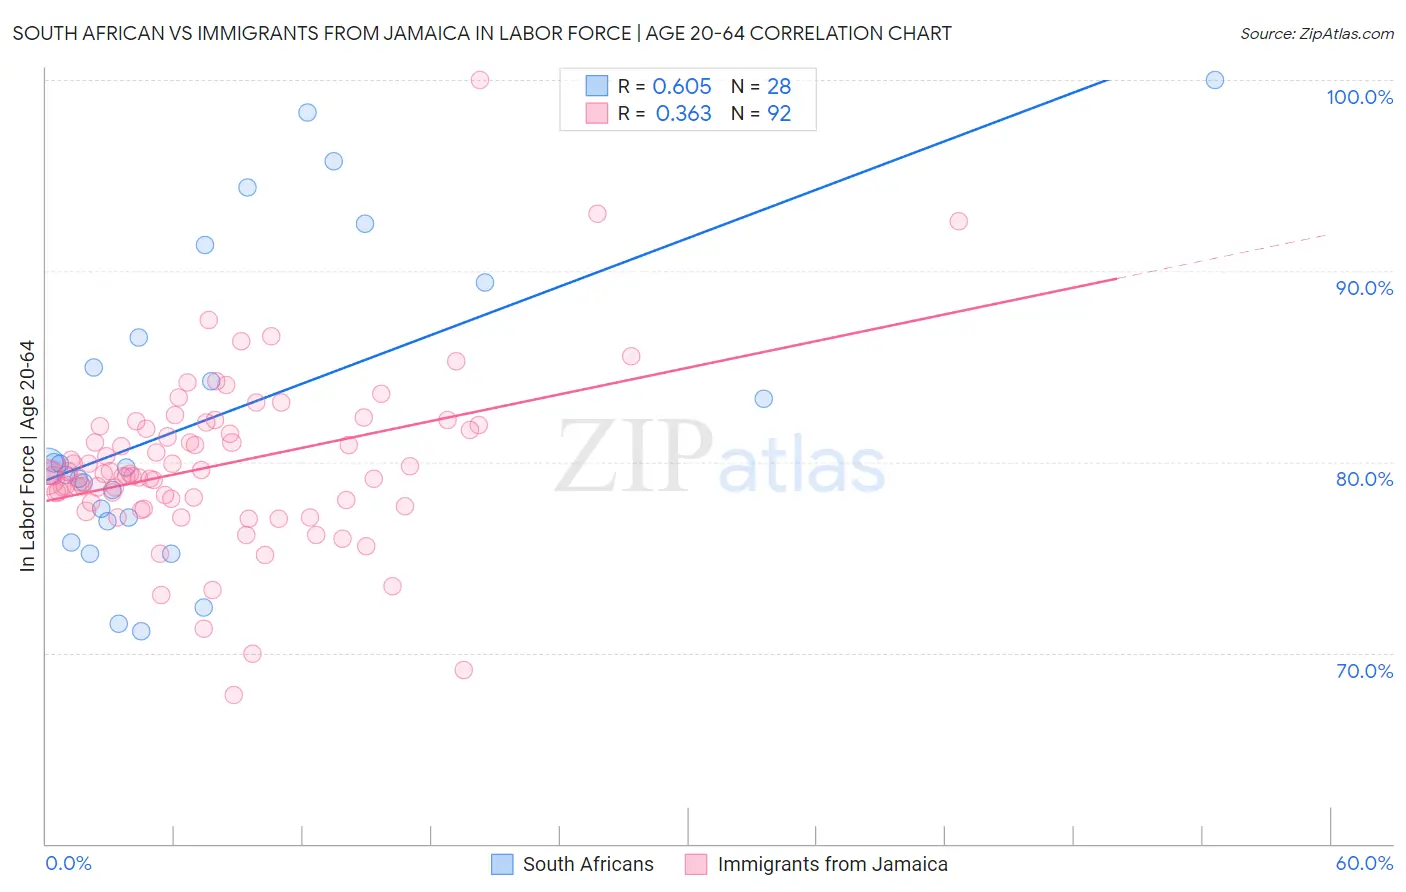 South African vs Immigrants from Jamaica In Labor Force | Age 20-64